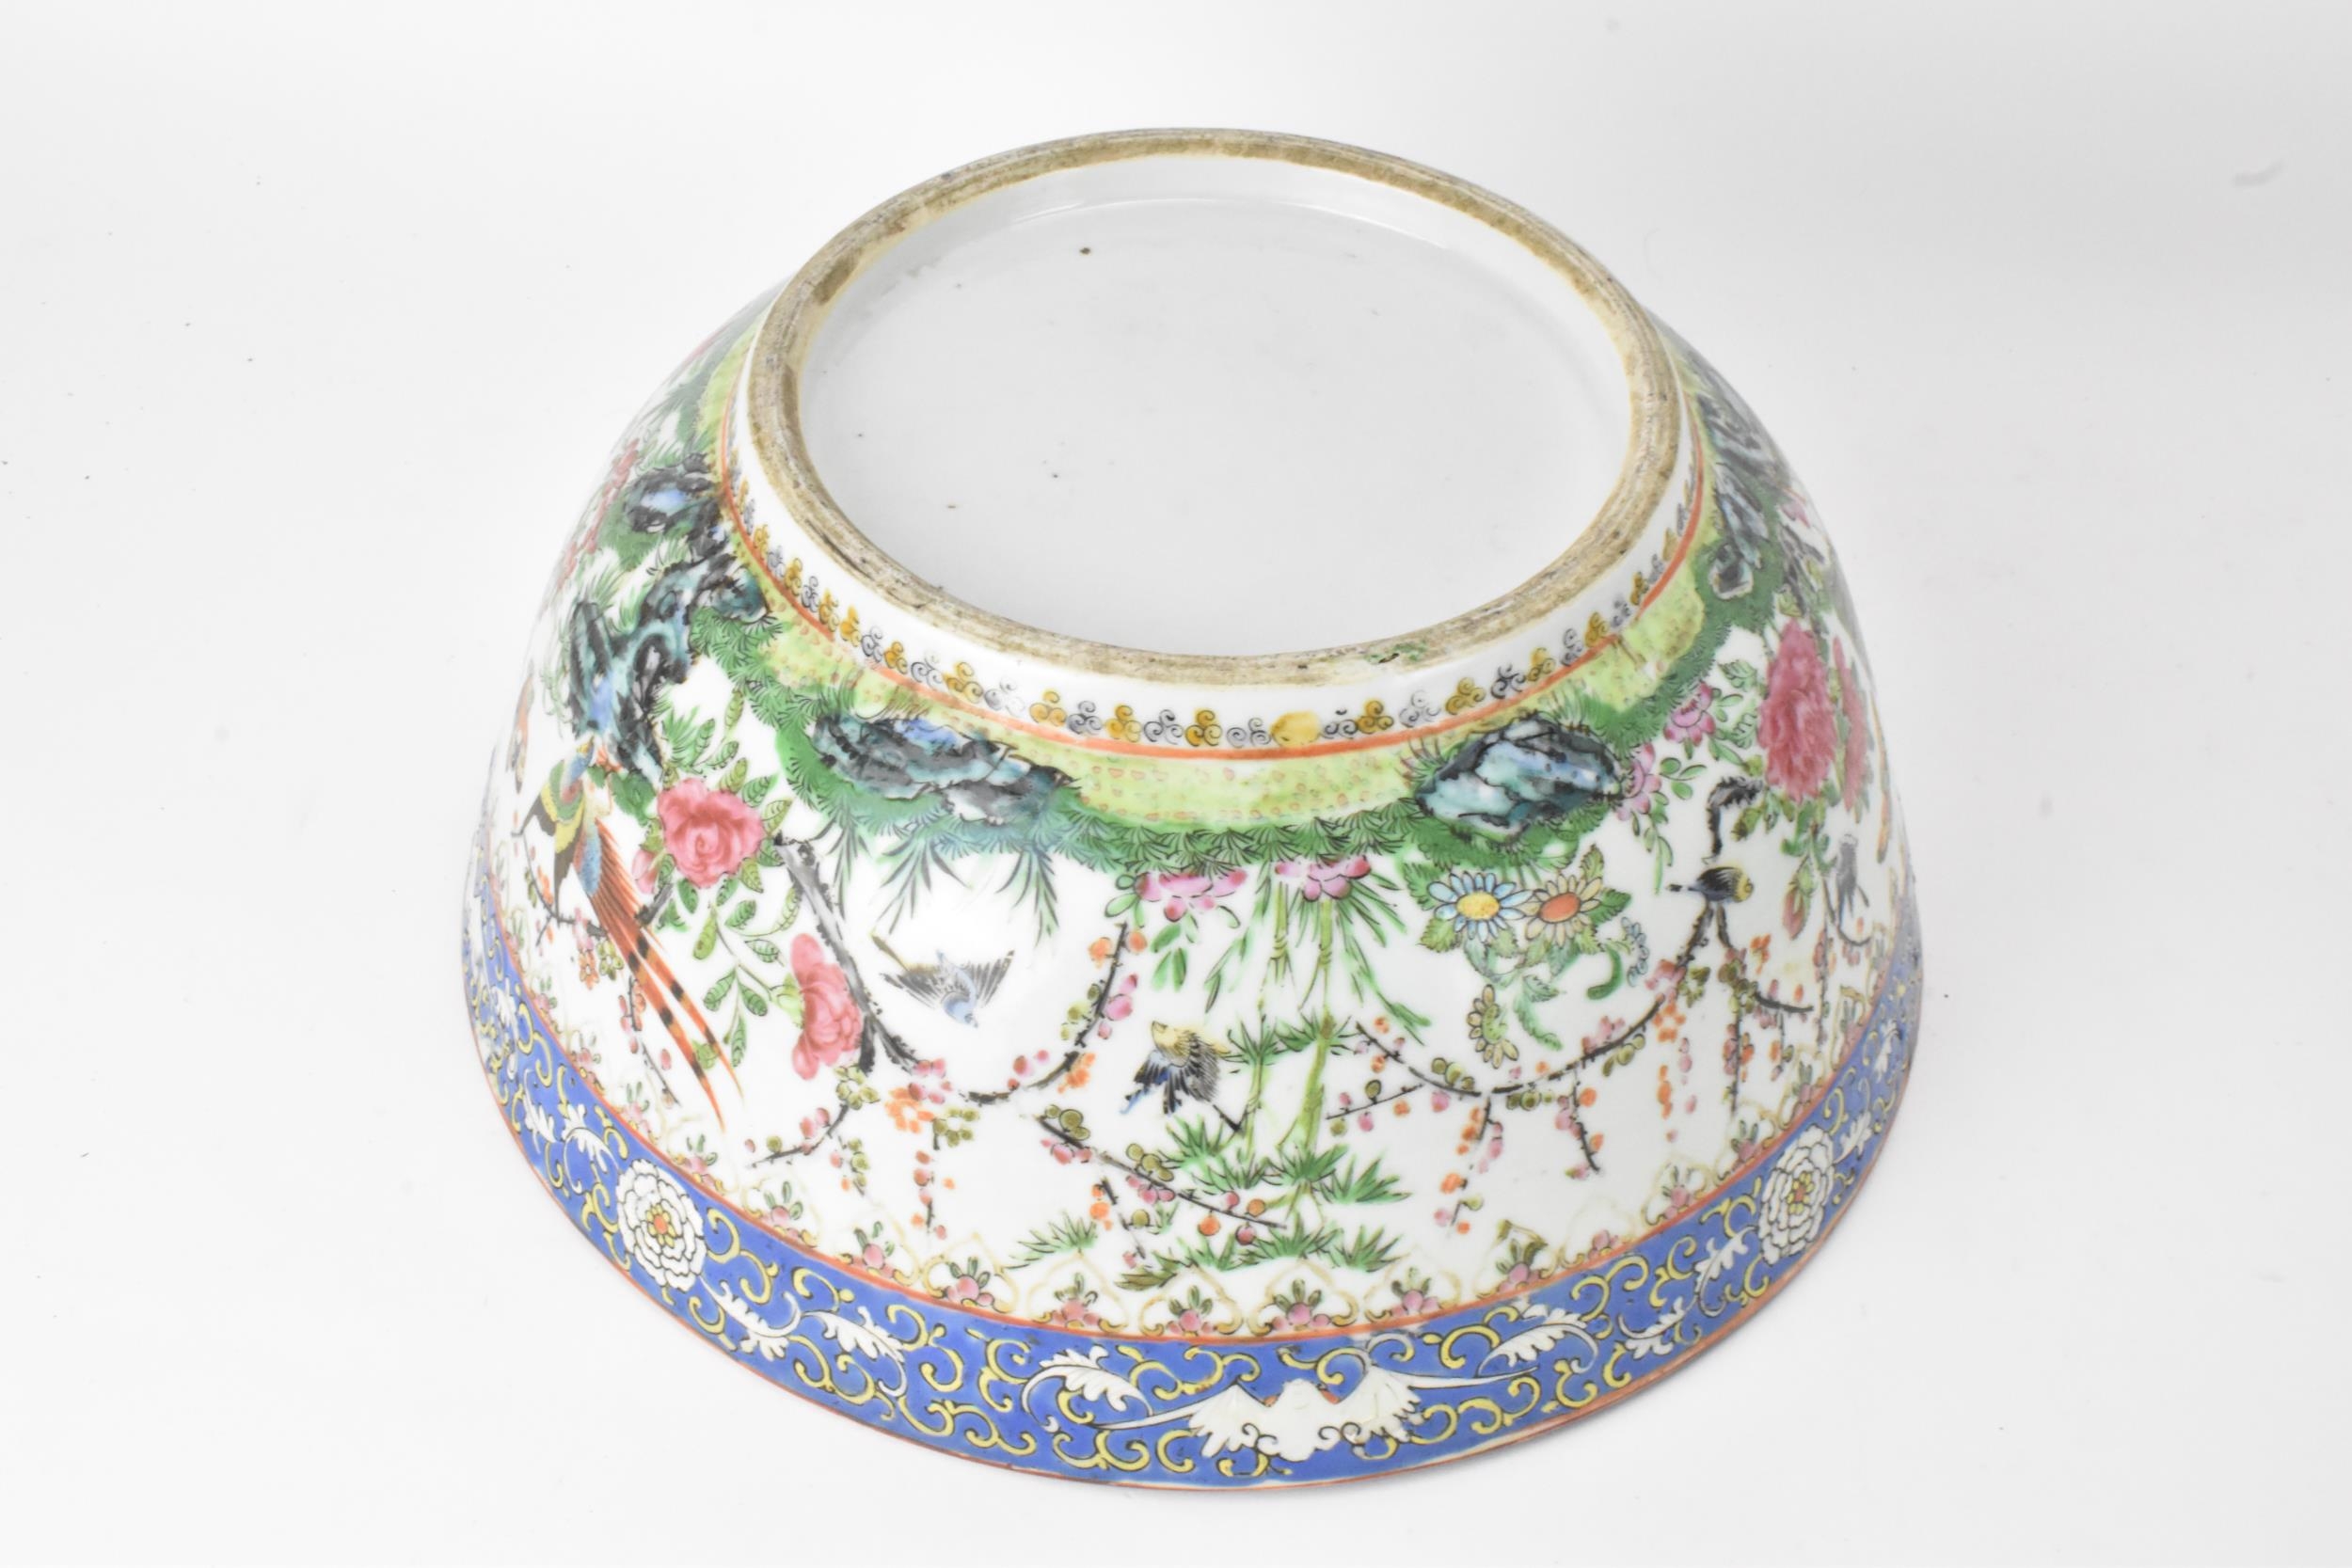 A near pair of Chinese export Canton famille rose punch bowls, Qing dynasty, late 19th century, - Image 7 of 15